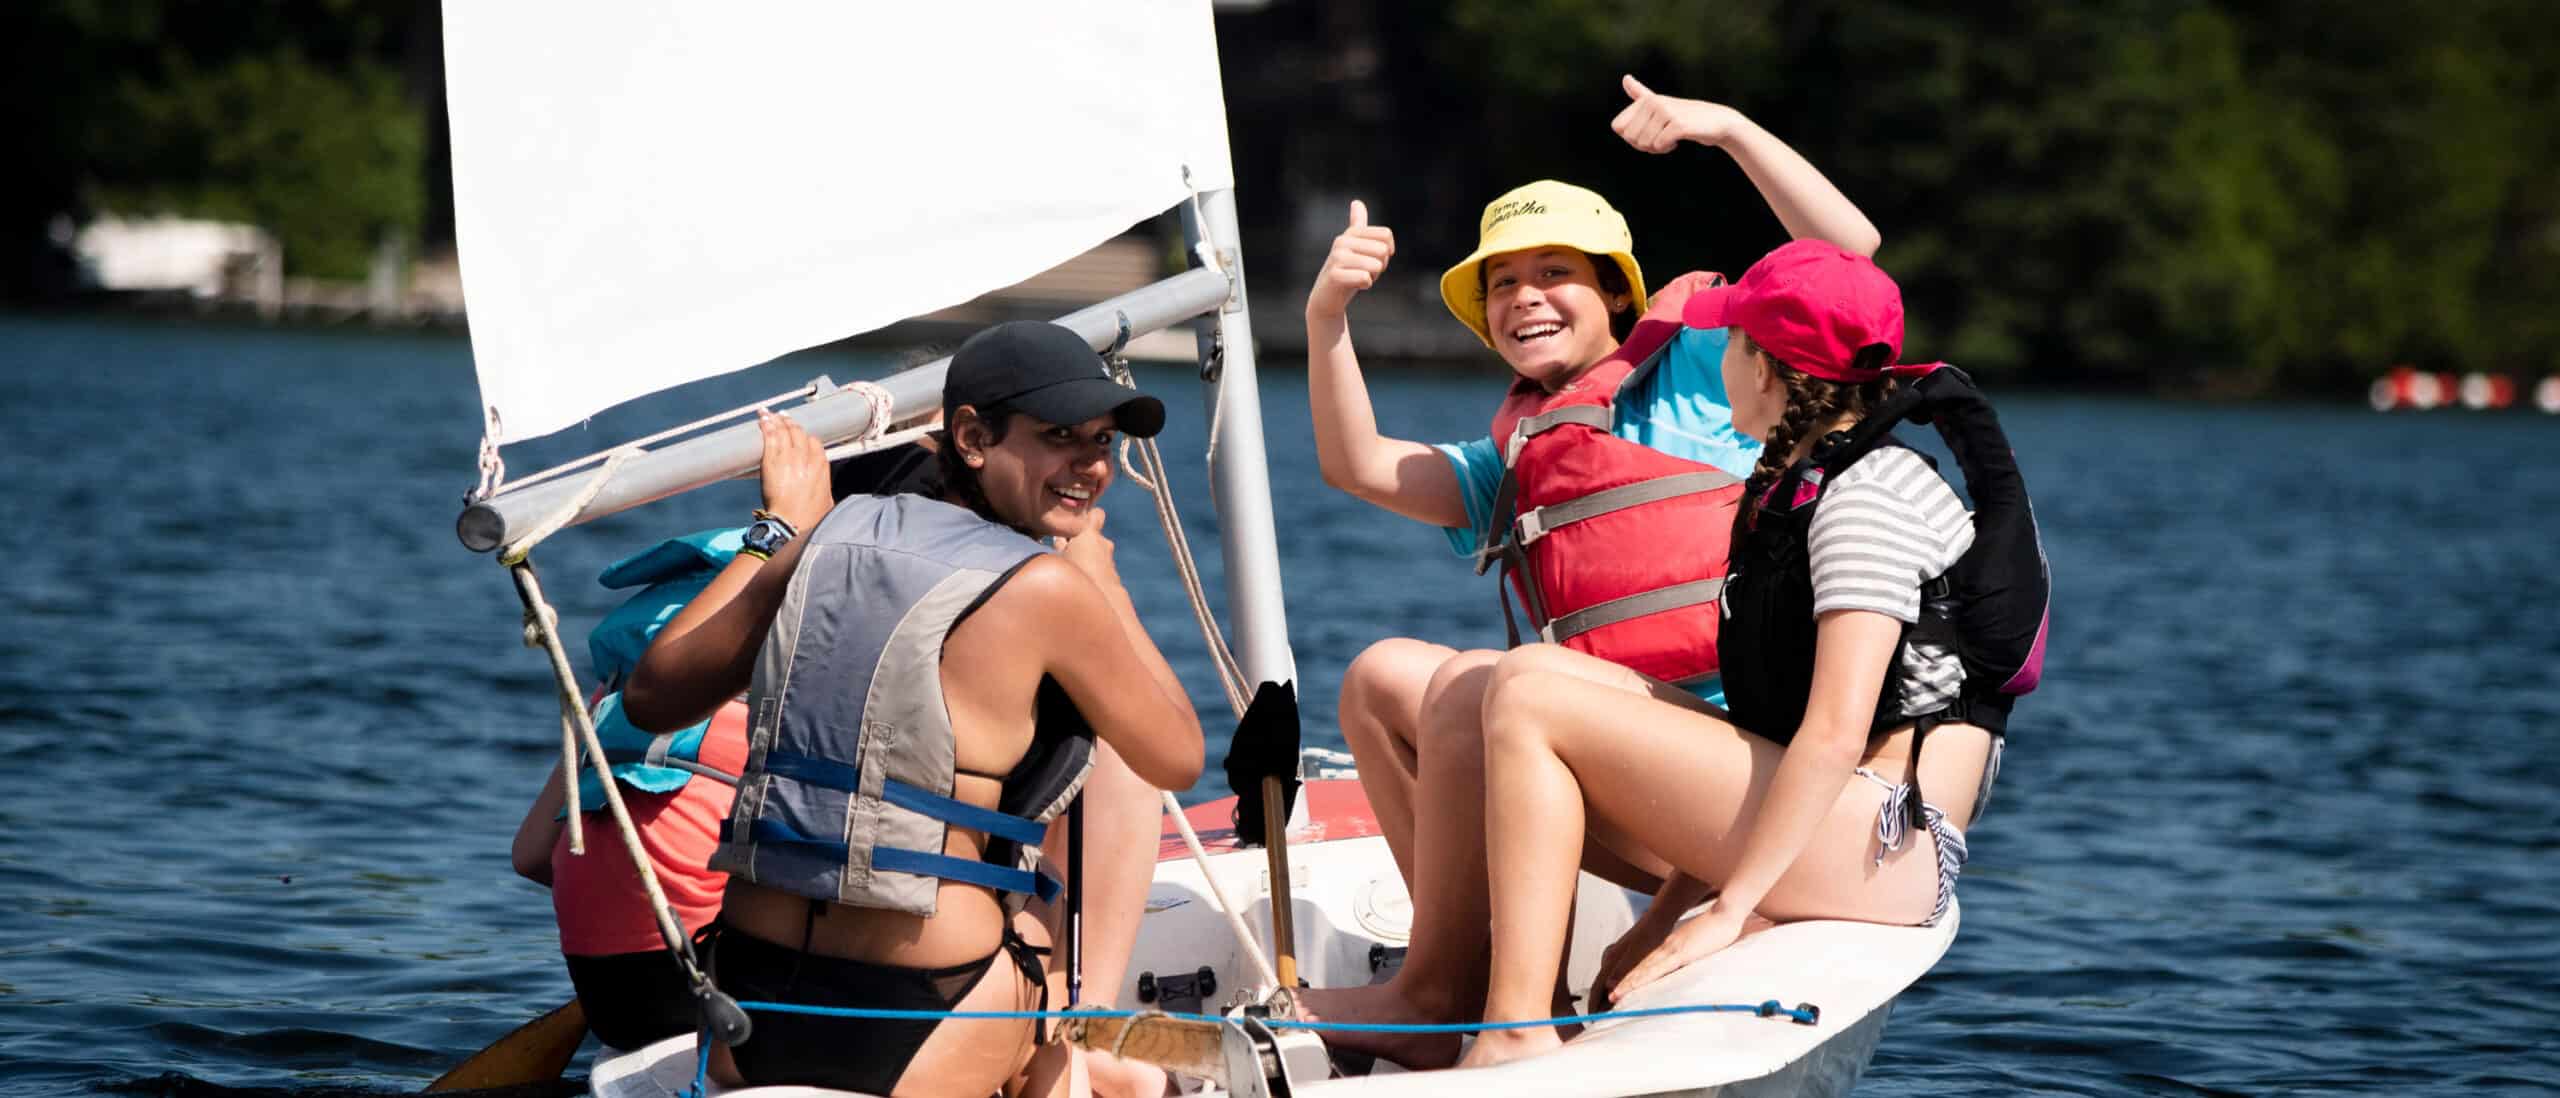 Campers smiling on sail boat